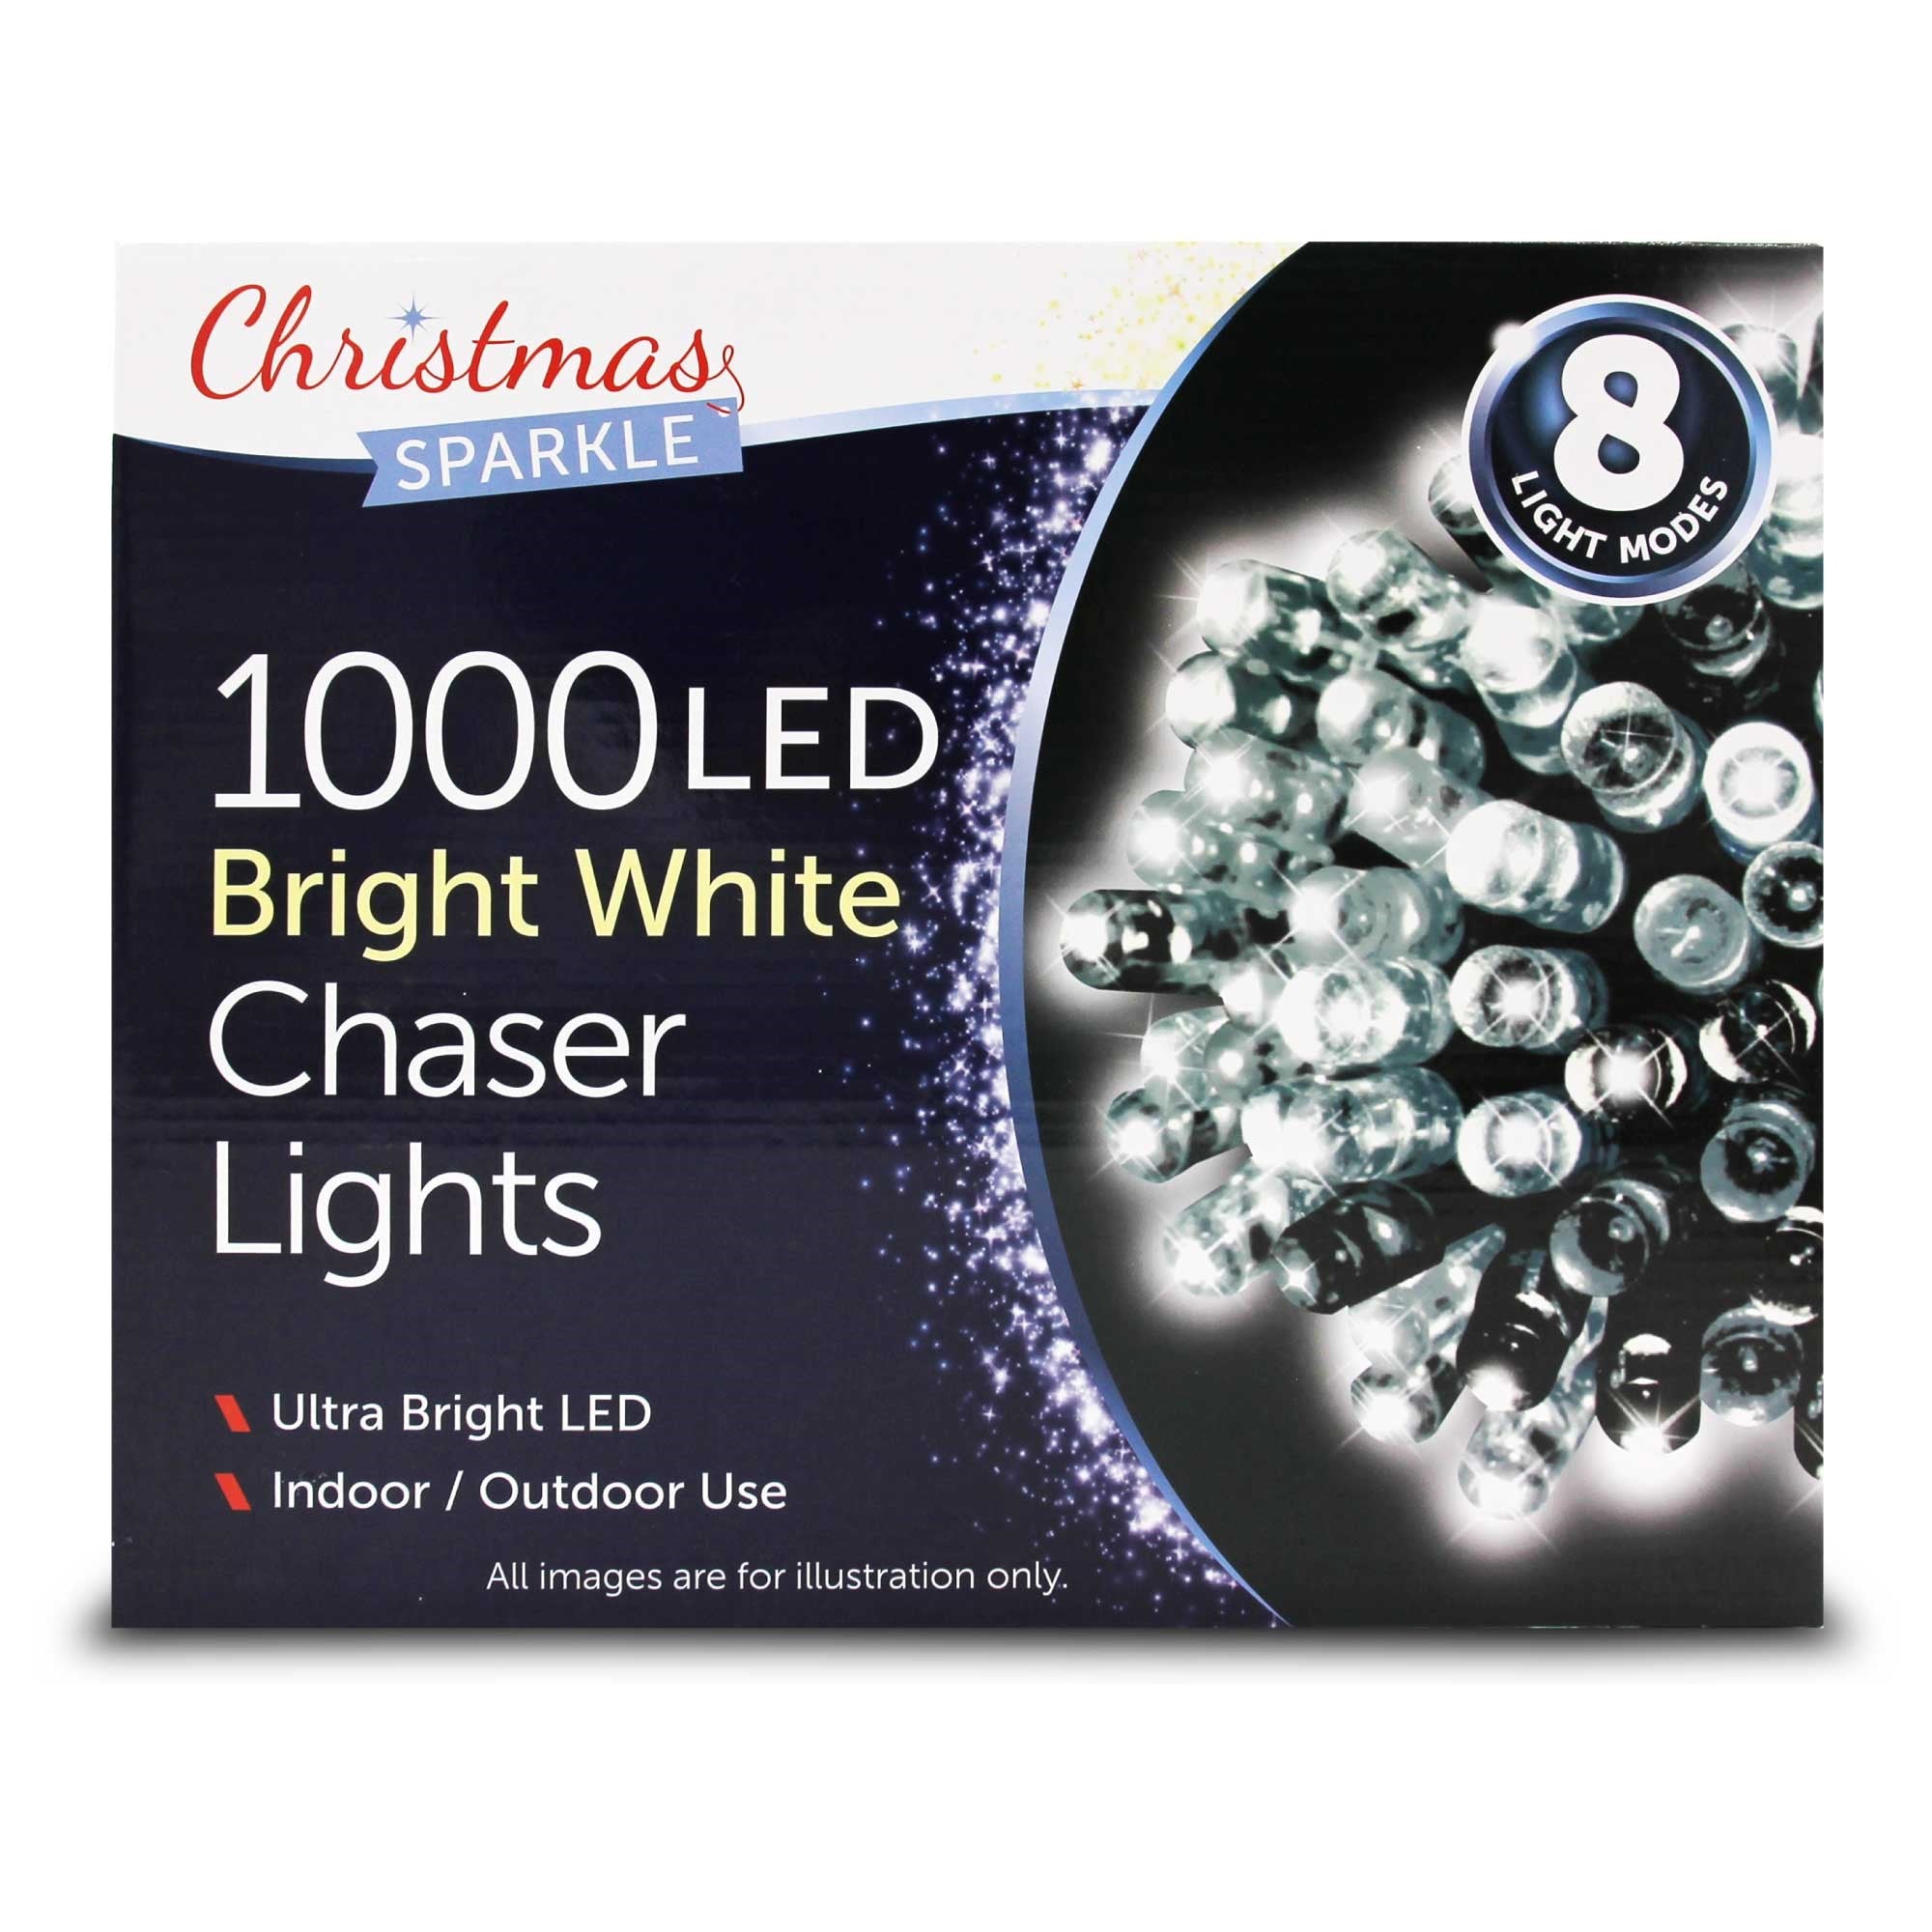 Christmas Sparkle Indoor and Outdoor Chaser Lights x 1000 White LEDs - Mains Operated  | TJ Hughes